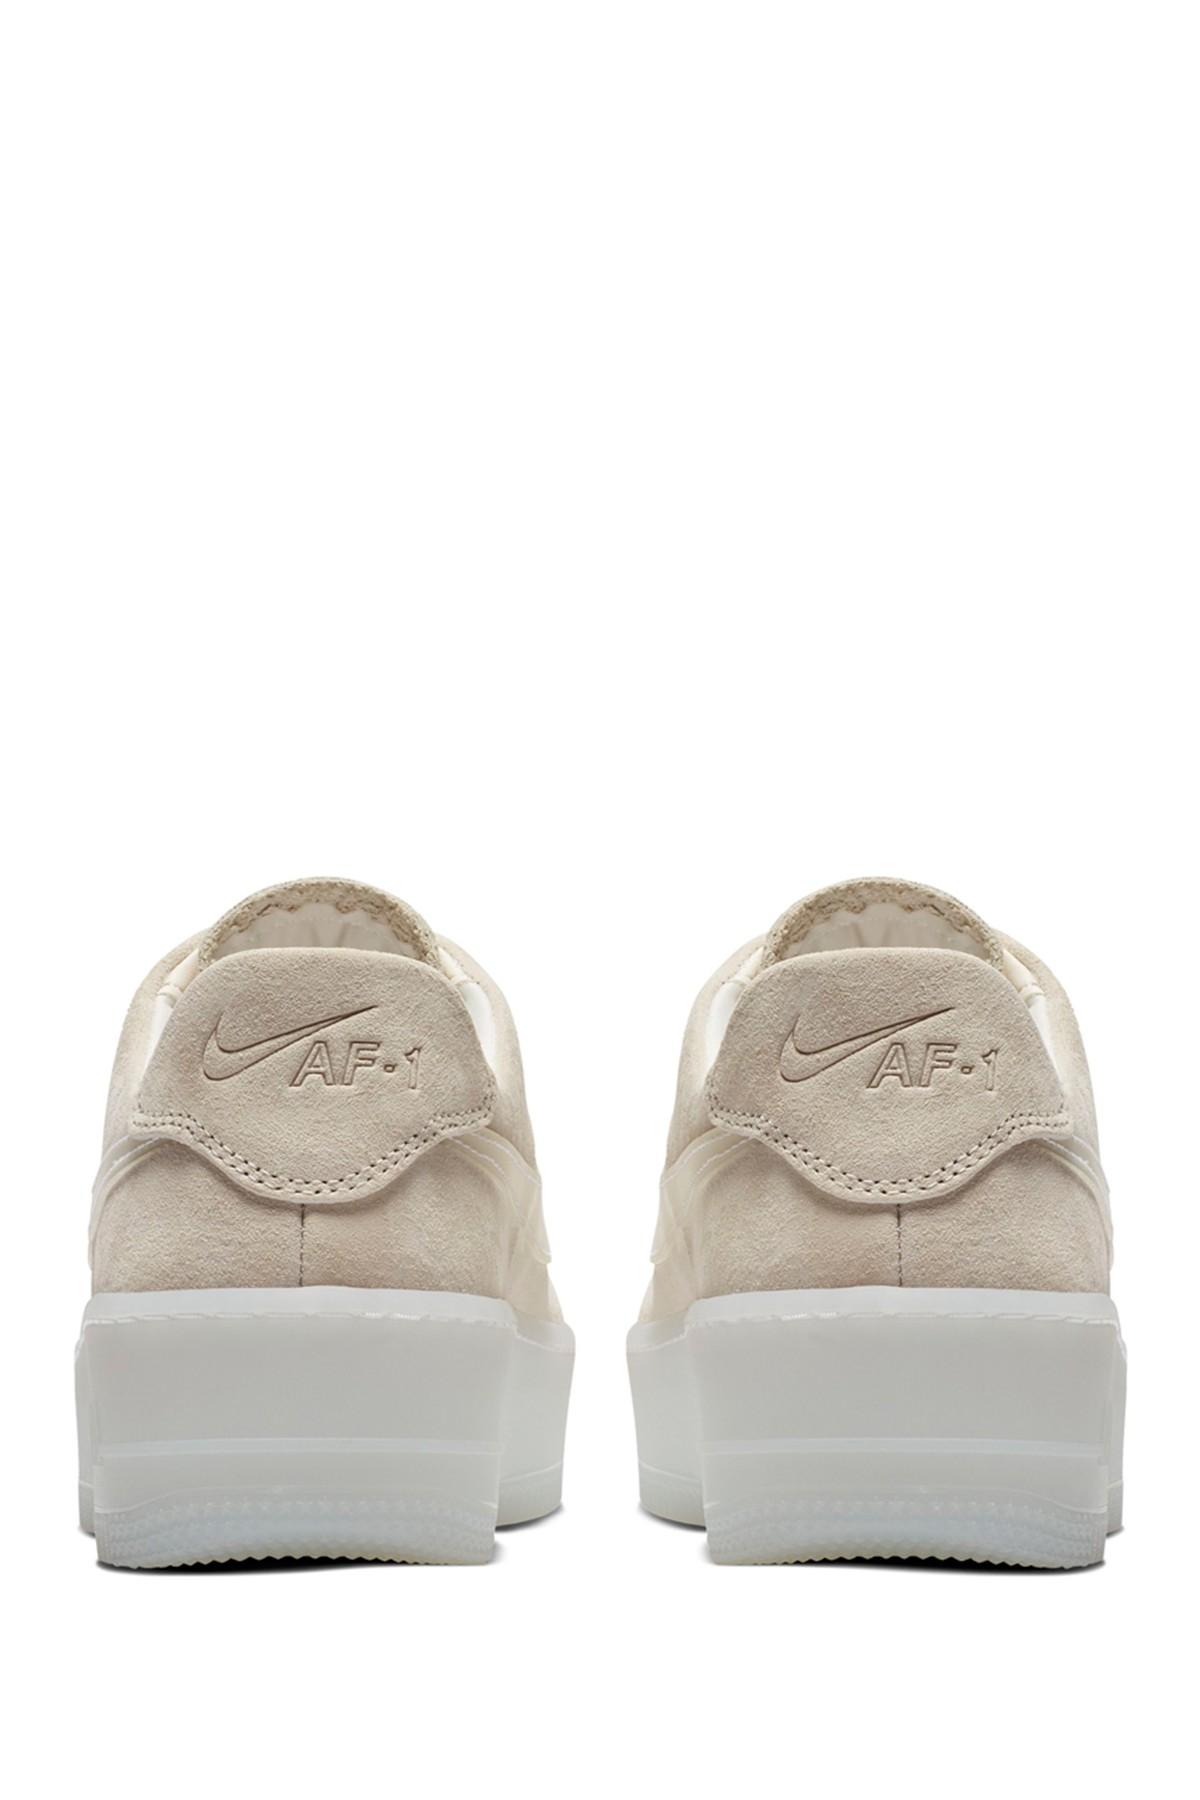 Nike Leather Air Force 1 Sage Low Lx Sneaker in White | Lyst برج الظلام